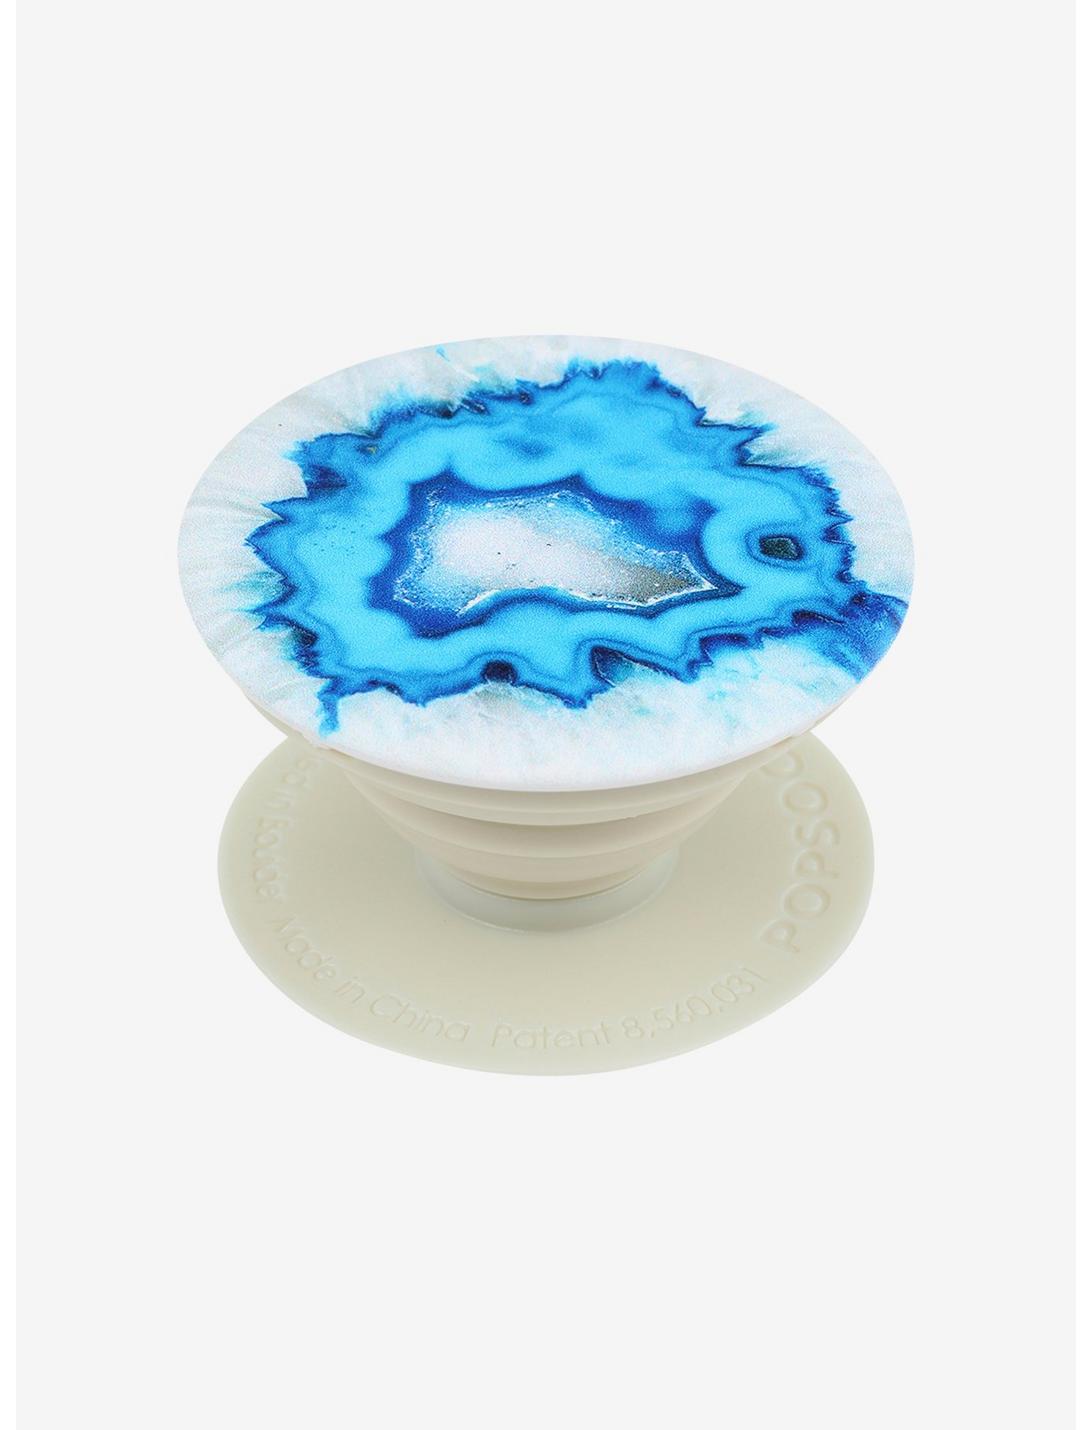 PopSockets Blue Agate Phone Grip & Stand, , hi-res